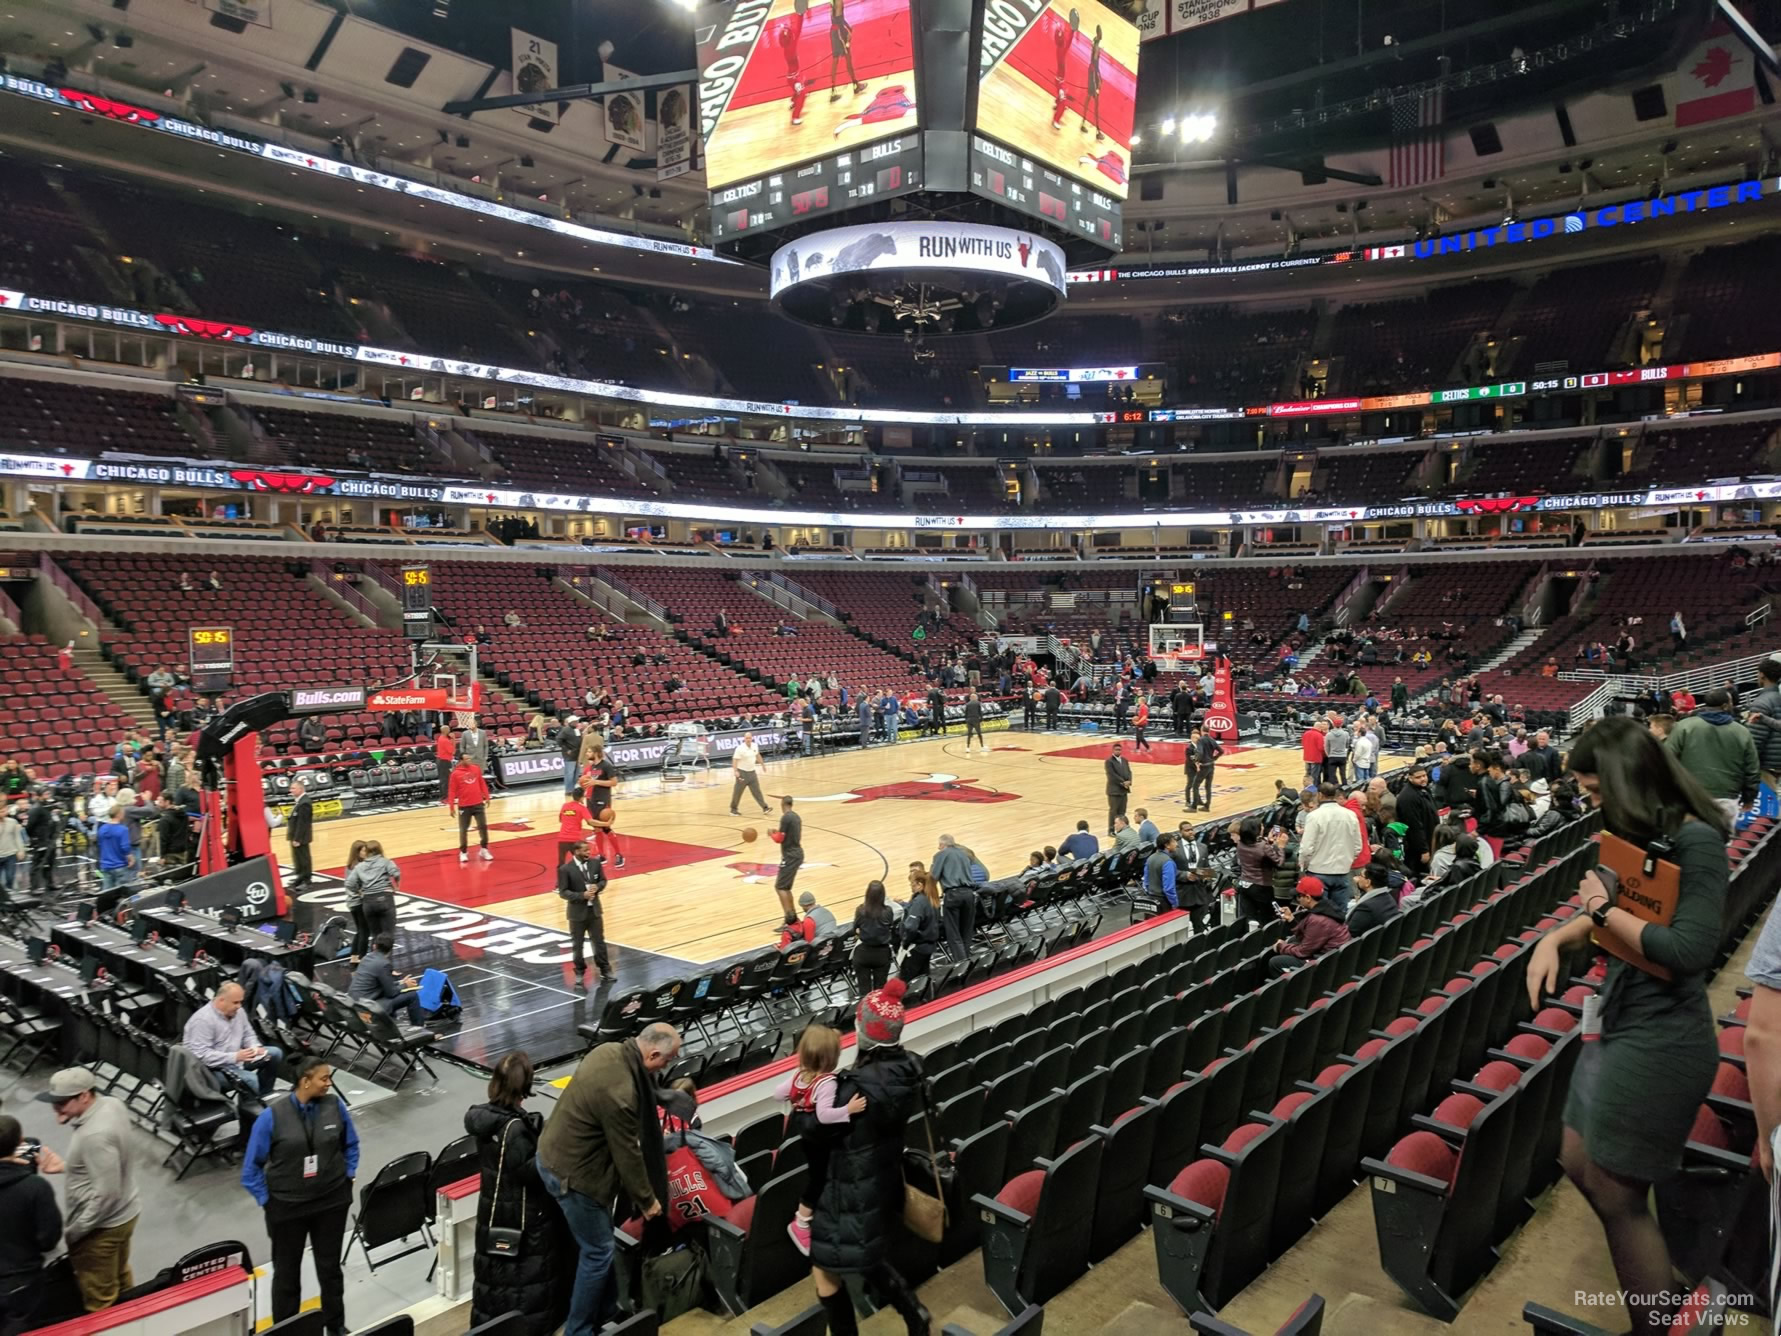 Section 114 at United Center - Chicago Bulls - RateYourSeats.com